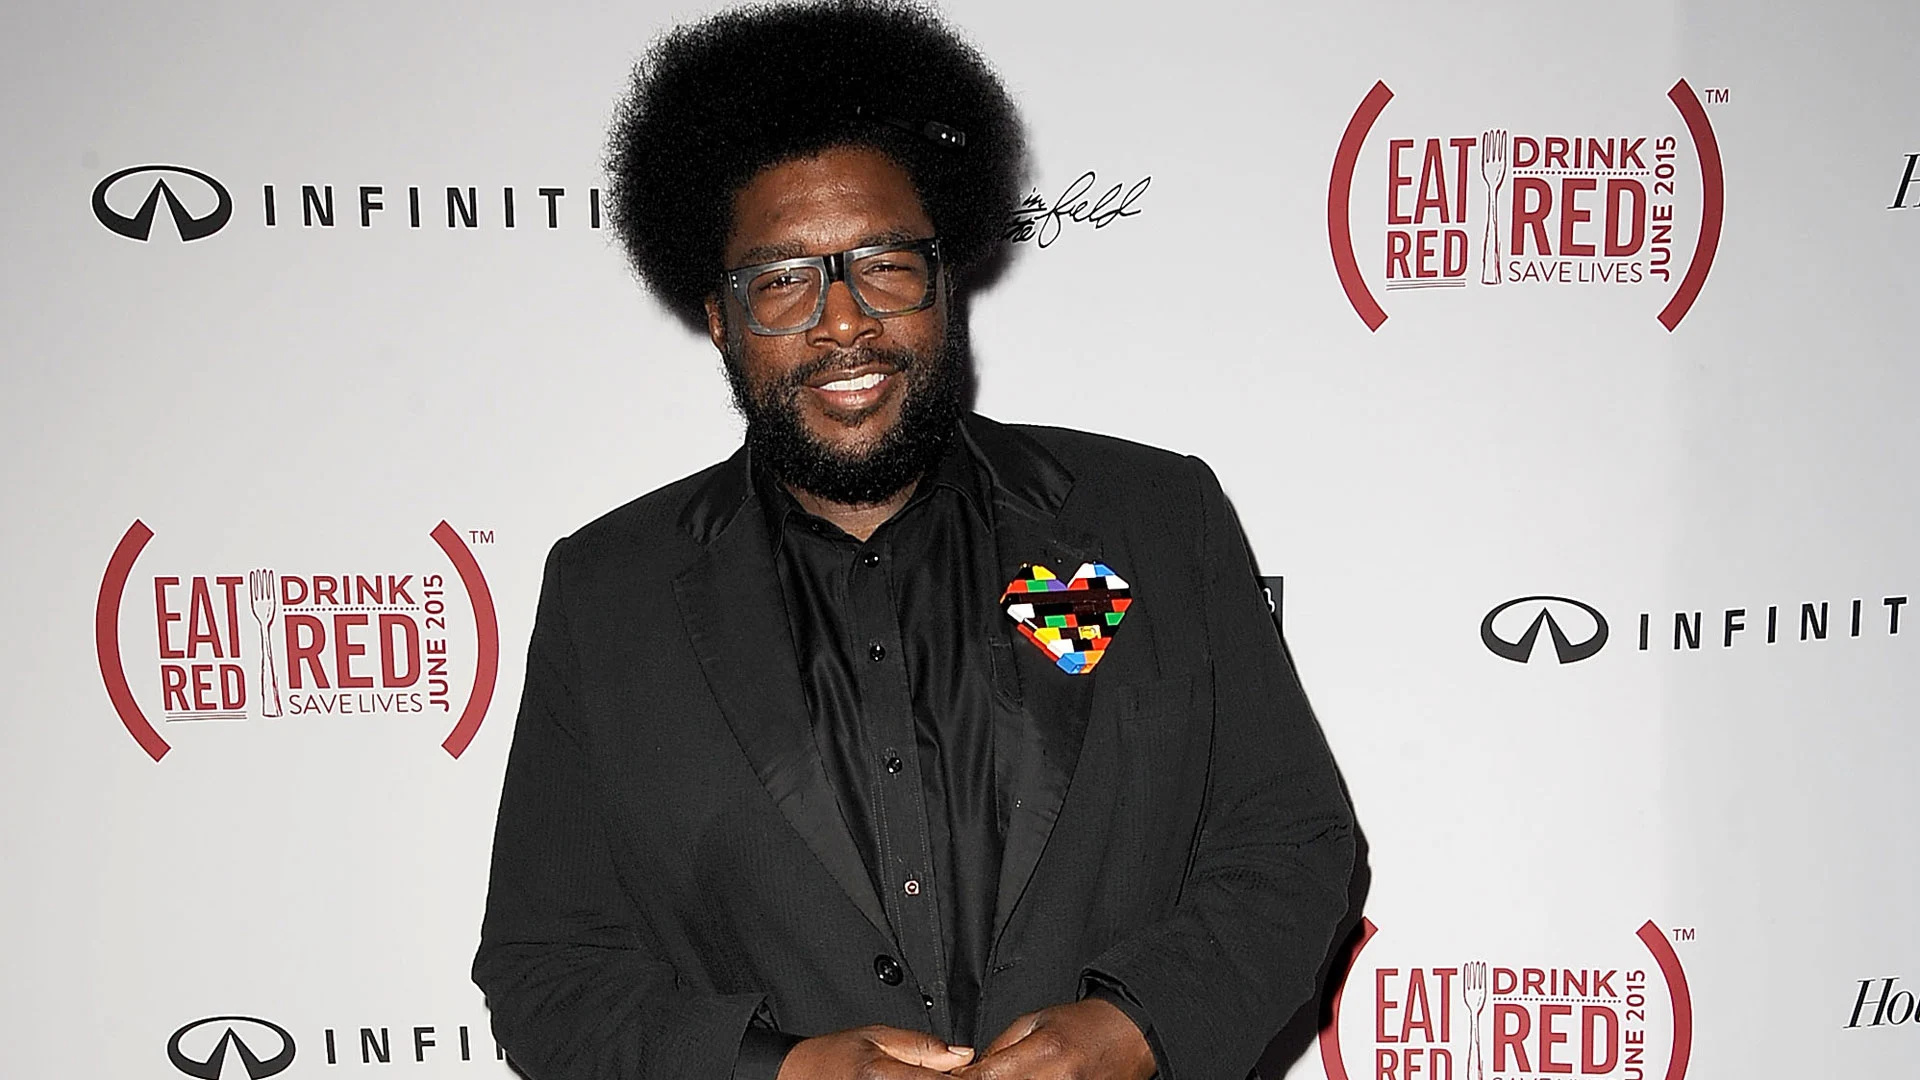 Oversee music, Aes Roots revival, Variety, Questlove, 1920x1080 Full HD Desktop